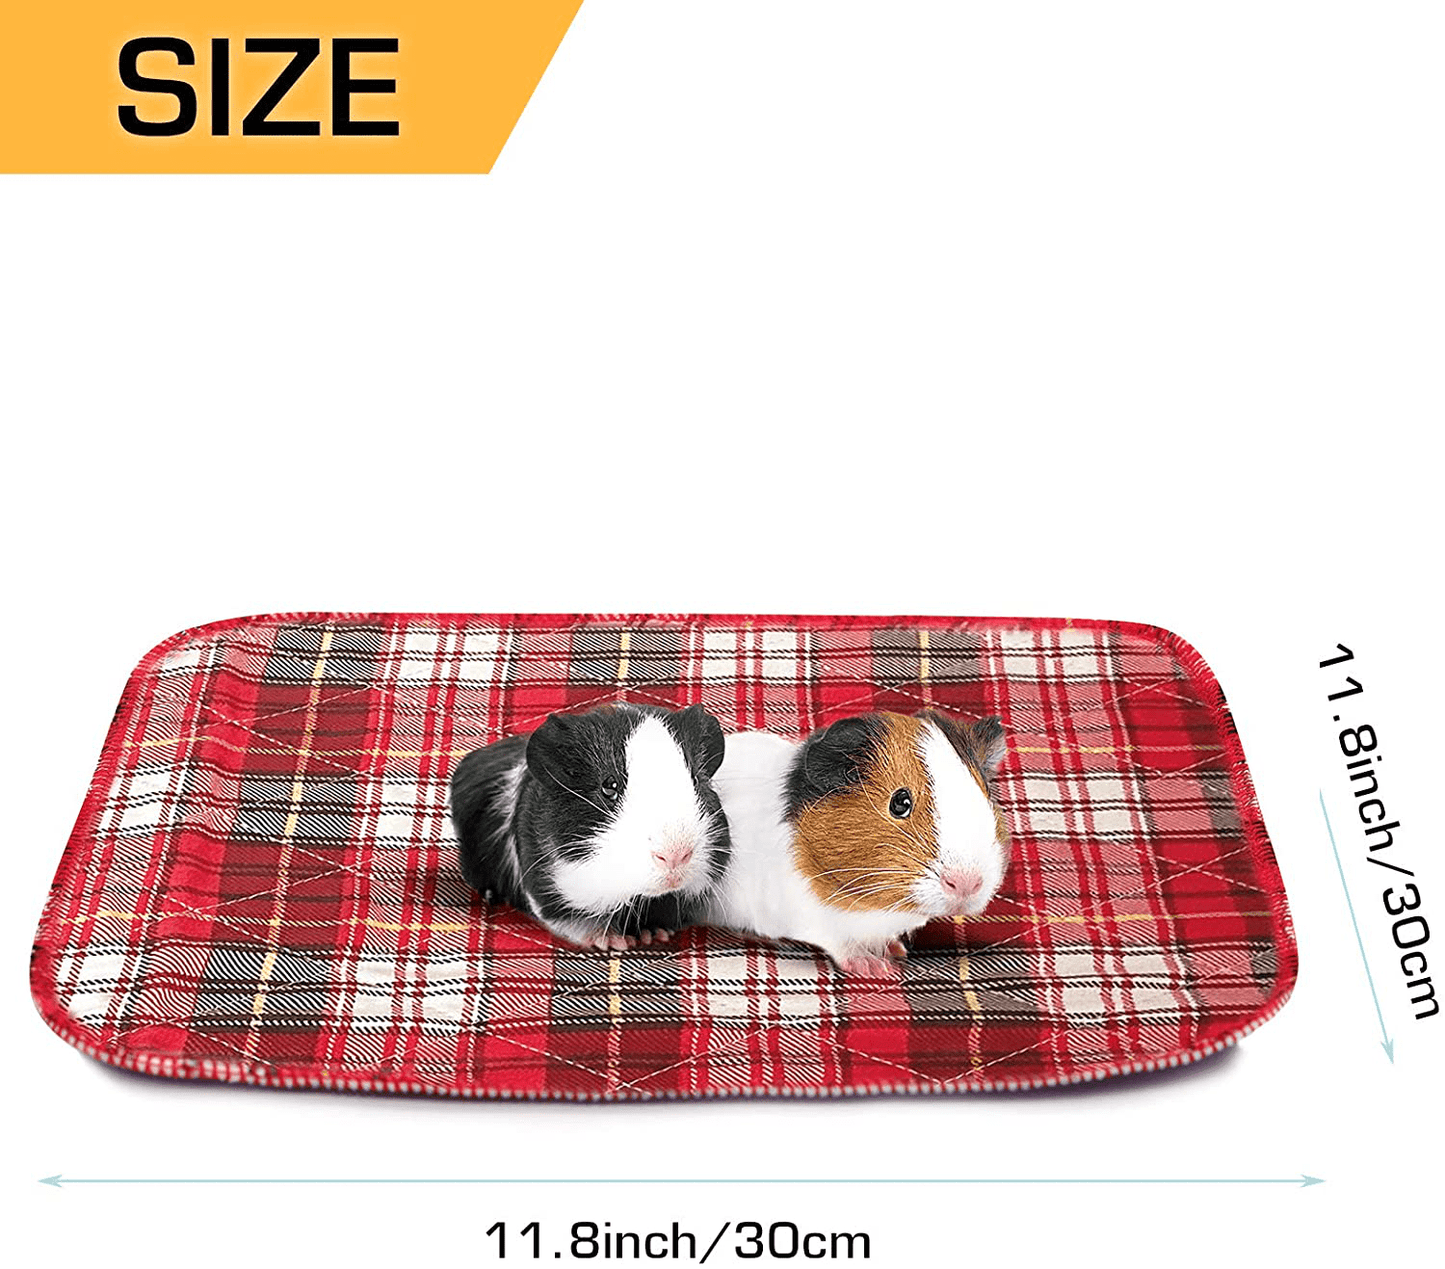 2 Pack Guinea Pig Cage Liner Plaid Pads Washable Training Mat Guinea Pig Bedding Waterproof anti Slip Pee Pads Super Absorbent Cage Liners Accessories for Chinchillas Bunnies Gerbils